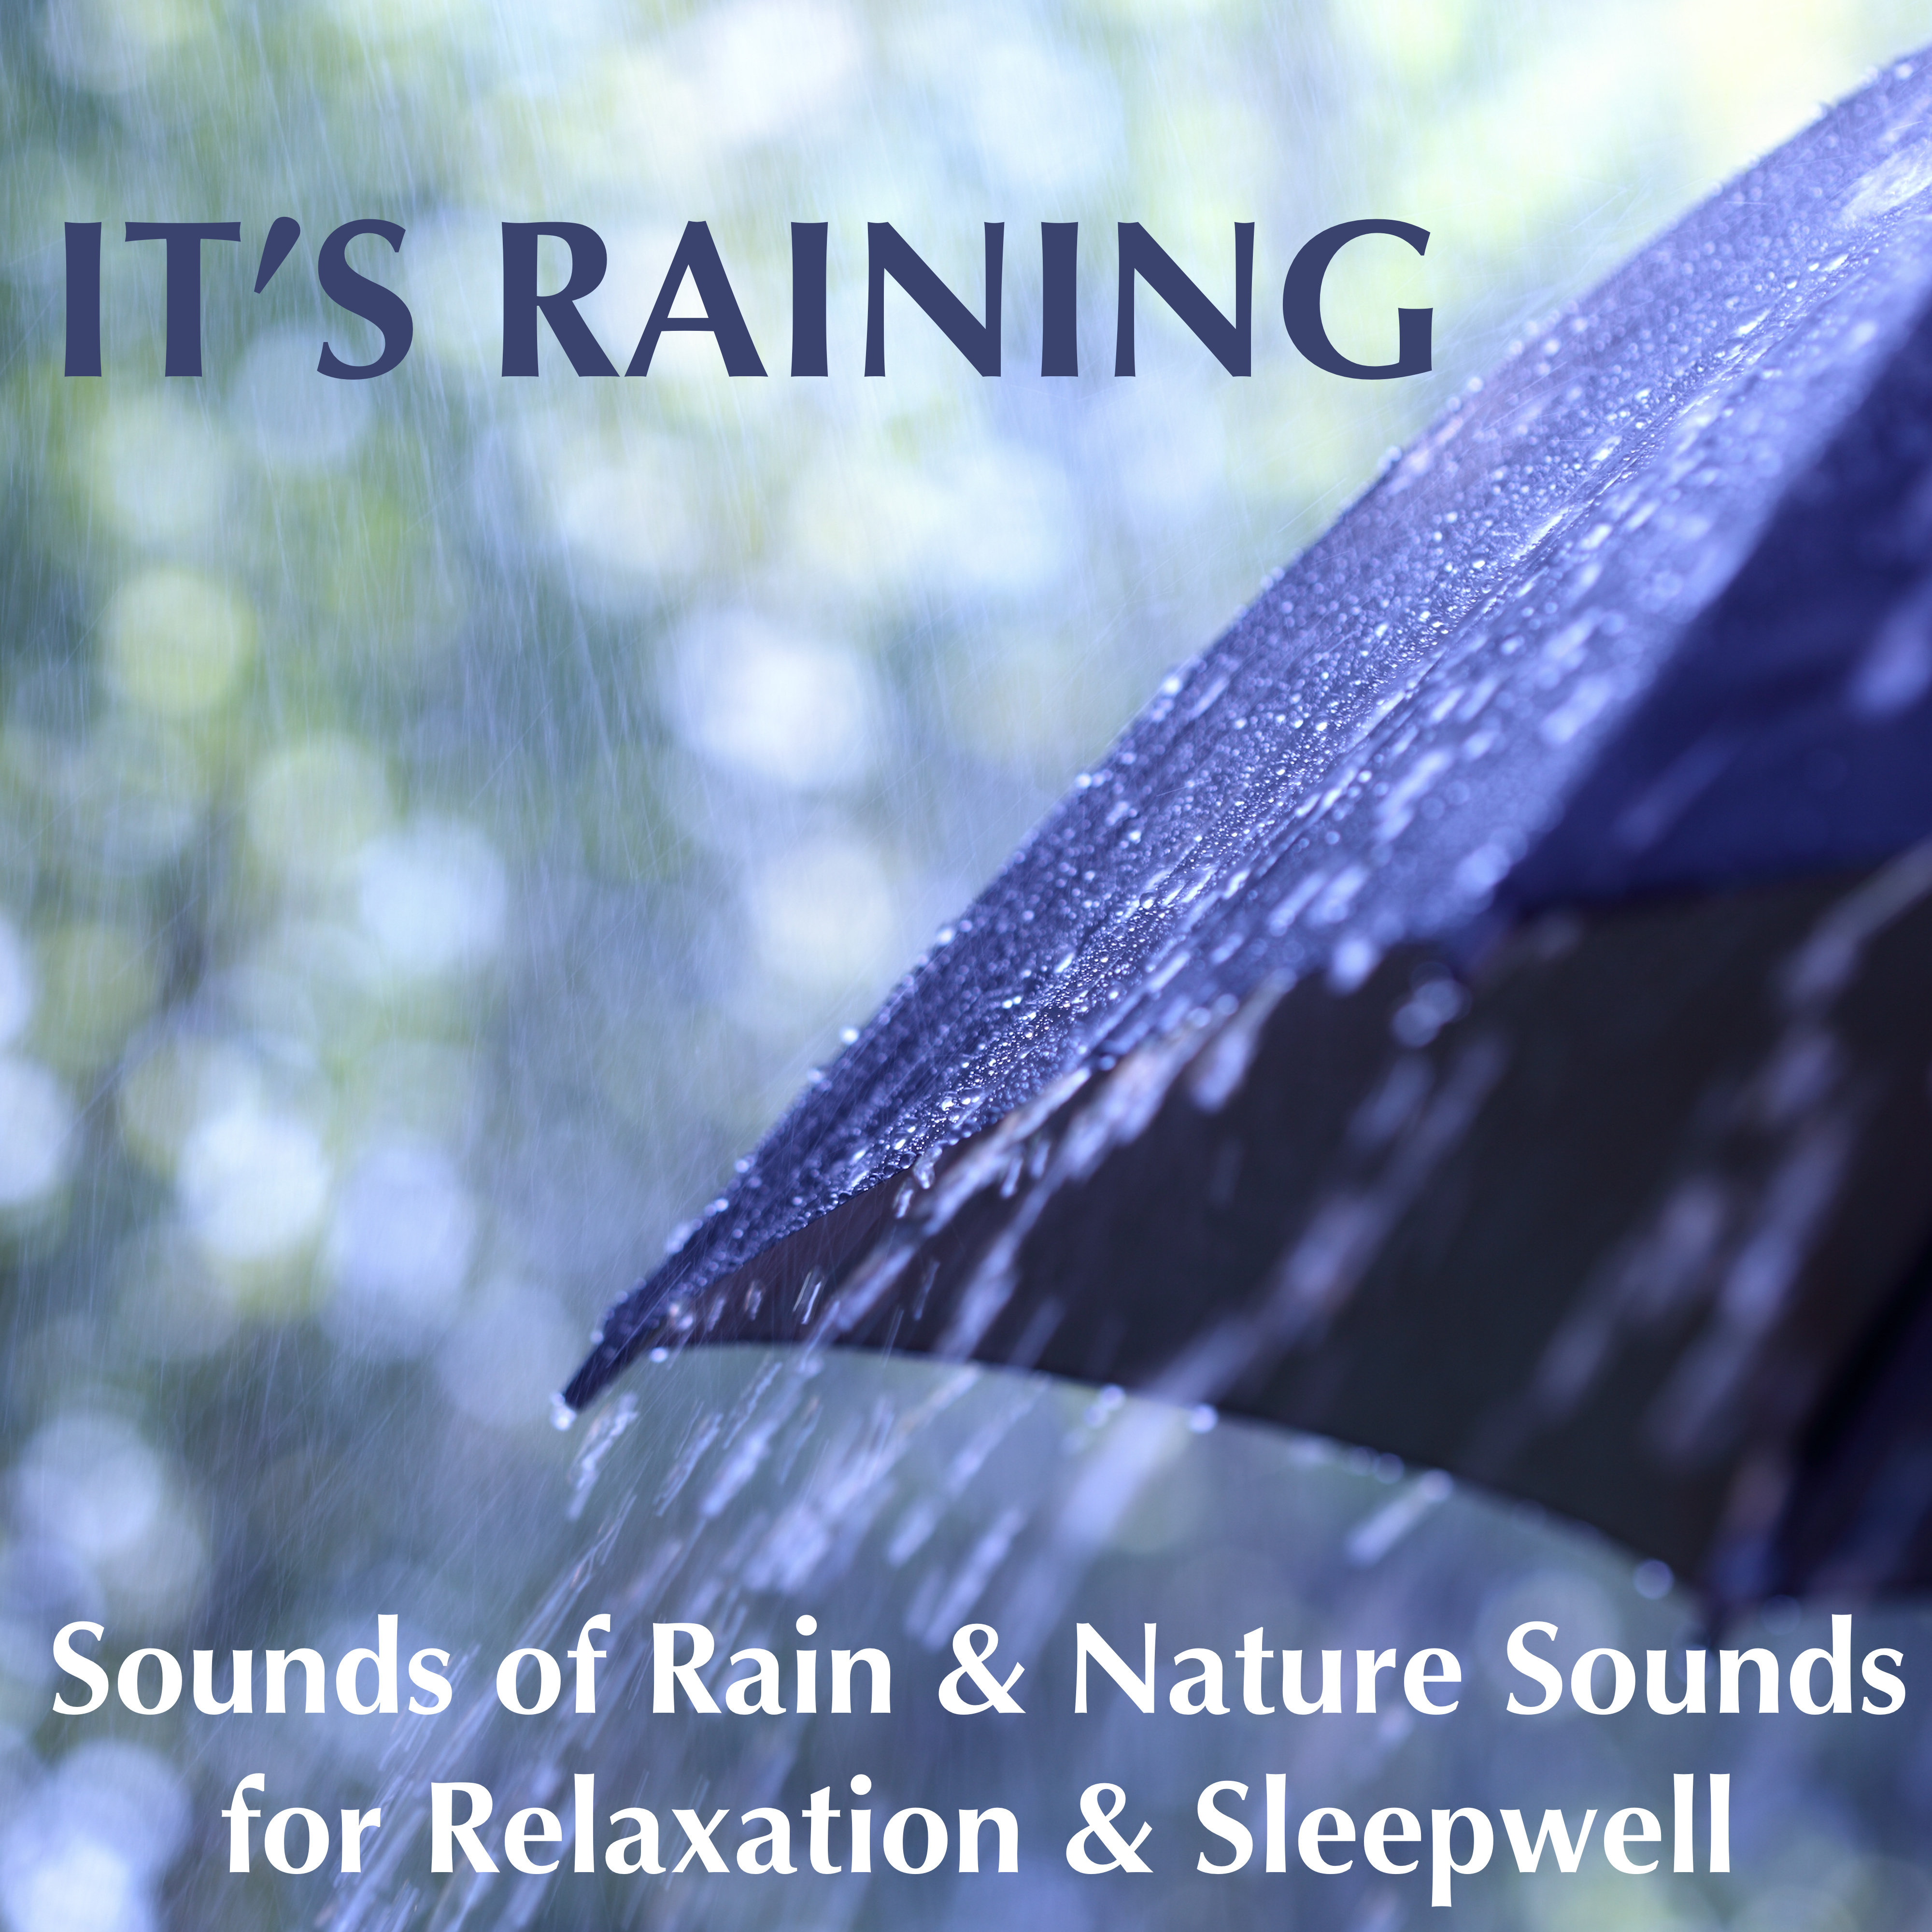 It's Raining: Sounds of Rain & Nature Sounds for Relaxation & Sleepwell, Playlist for Yoga Morning Meditation